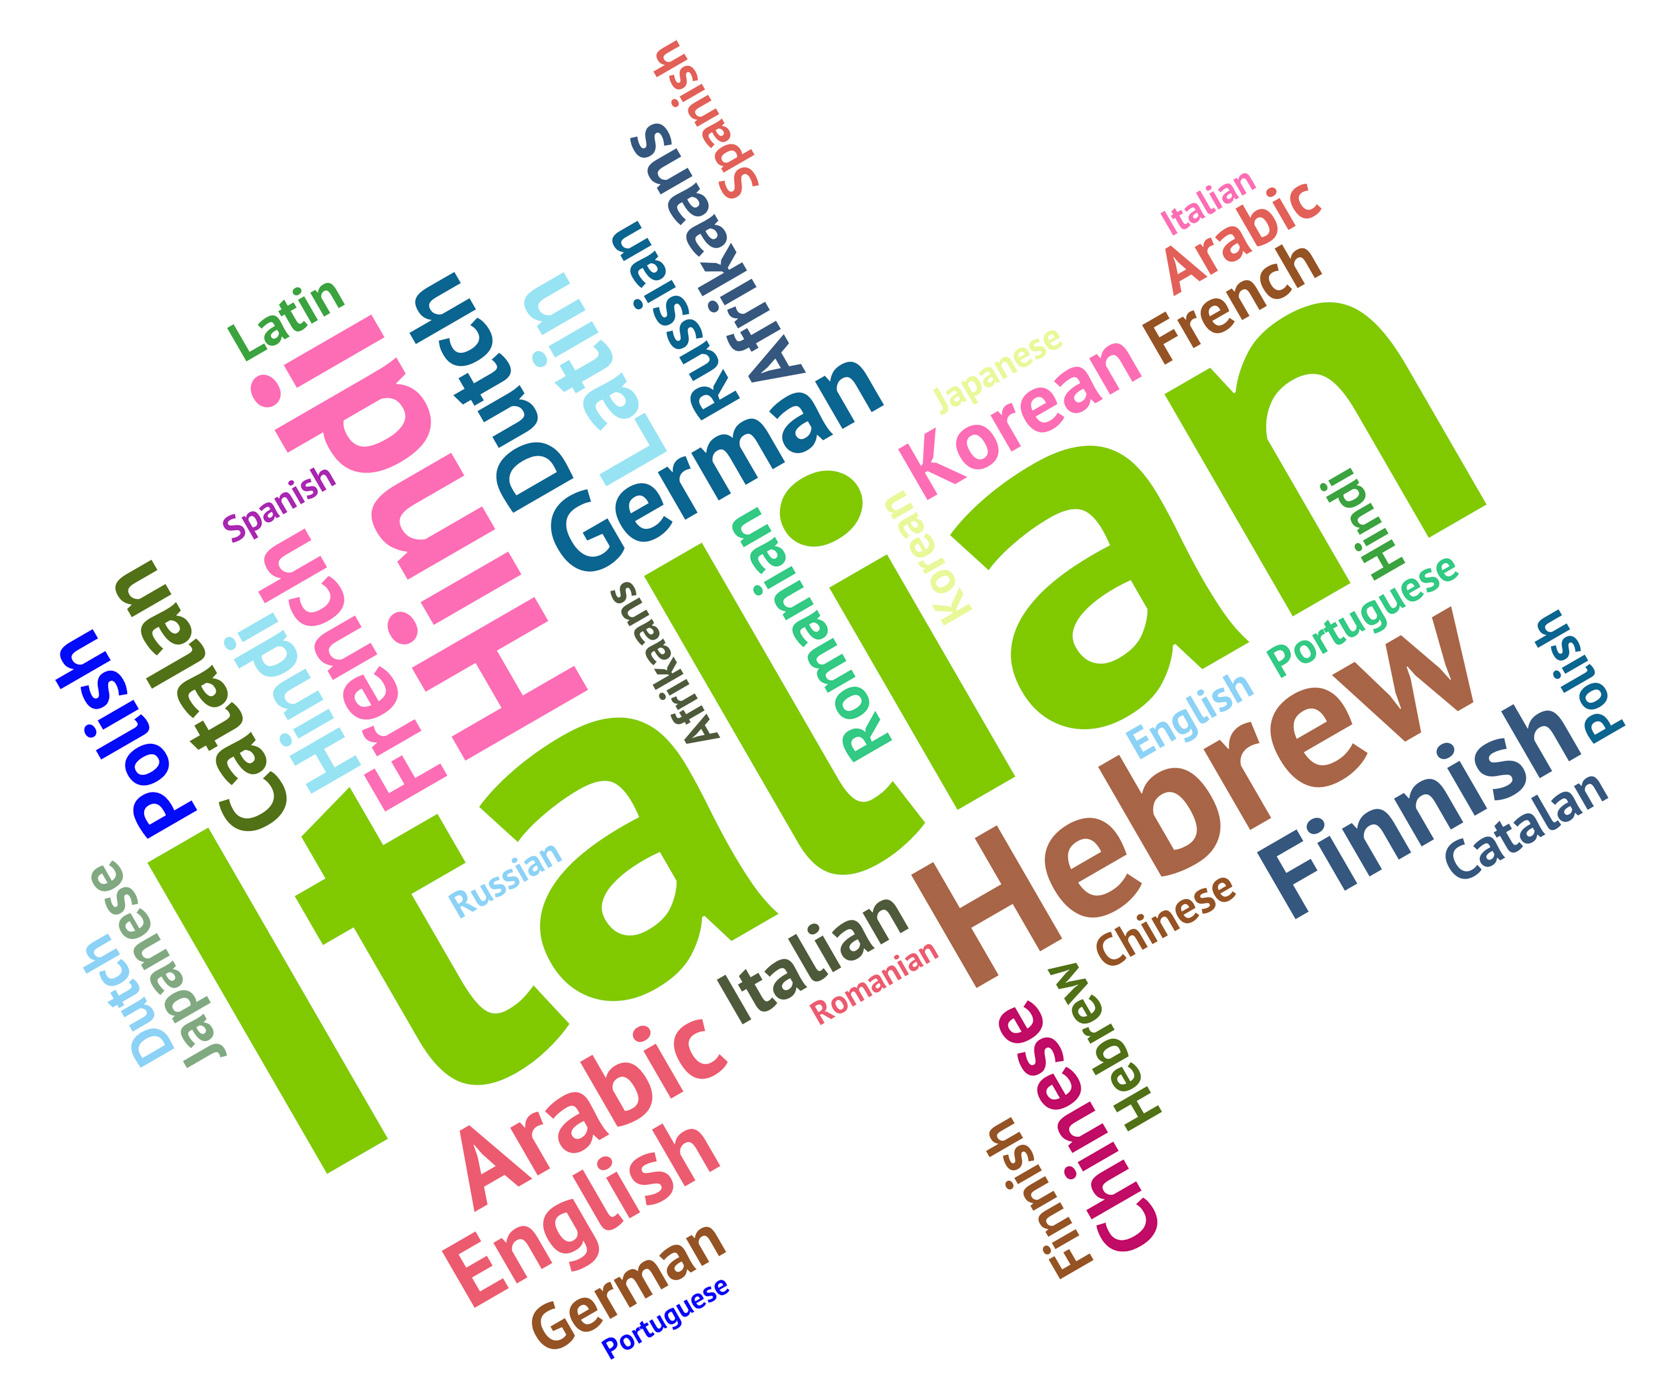 Italian language indicates speech text and foreign photo